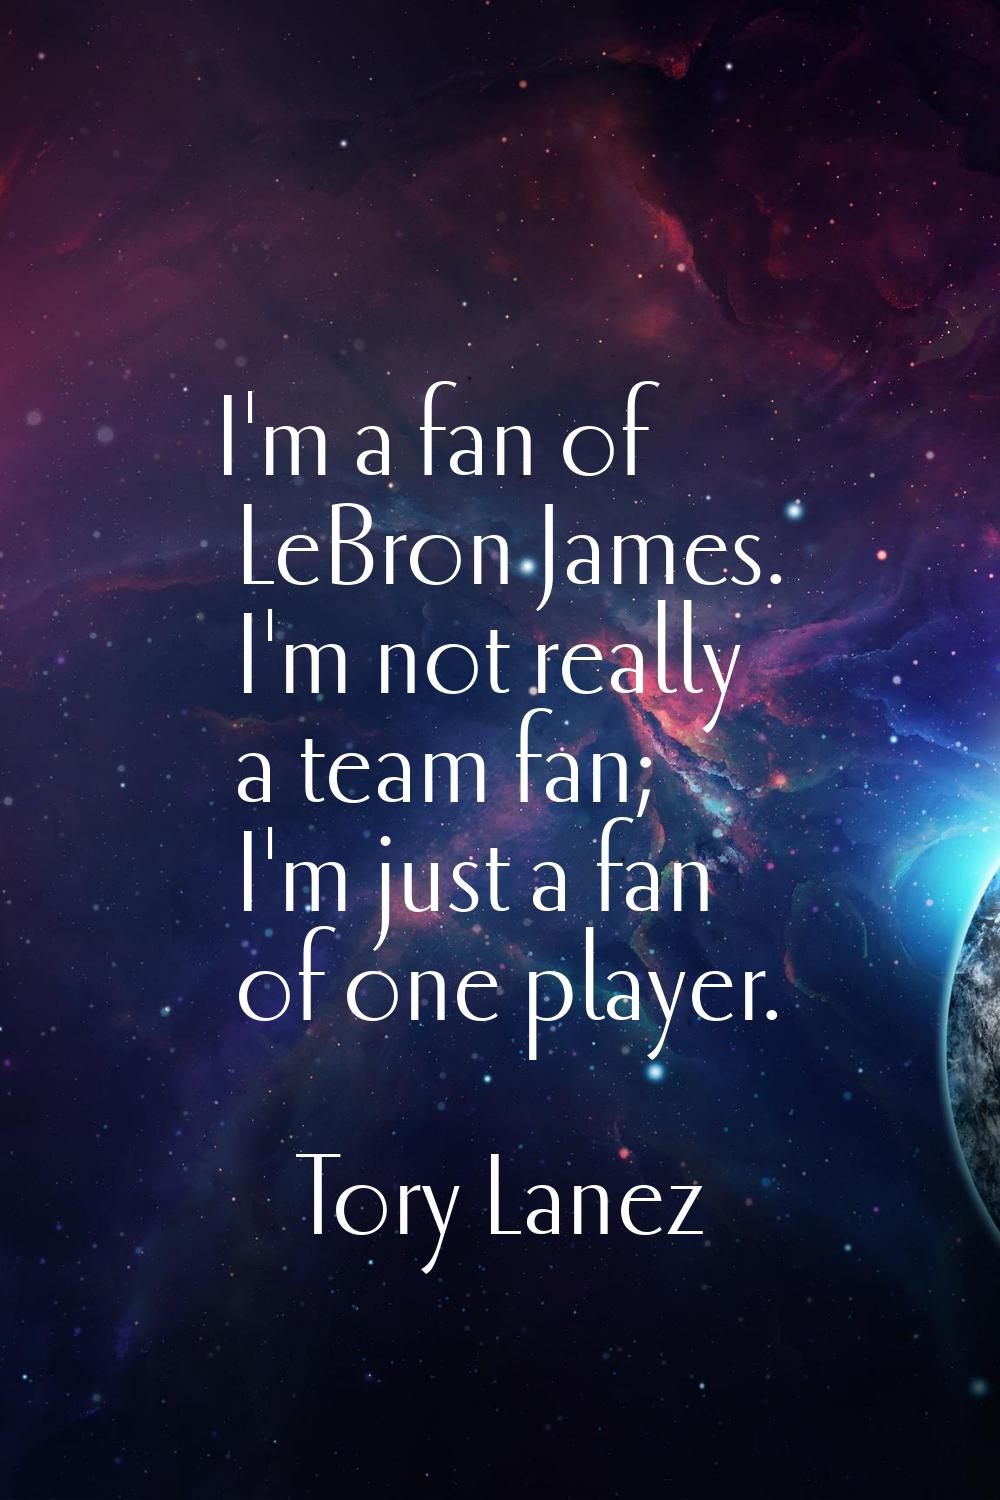 I'm a fan of LeBron James. I'm not really a team fan; I'm just a fan of one player.